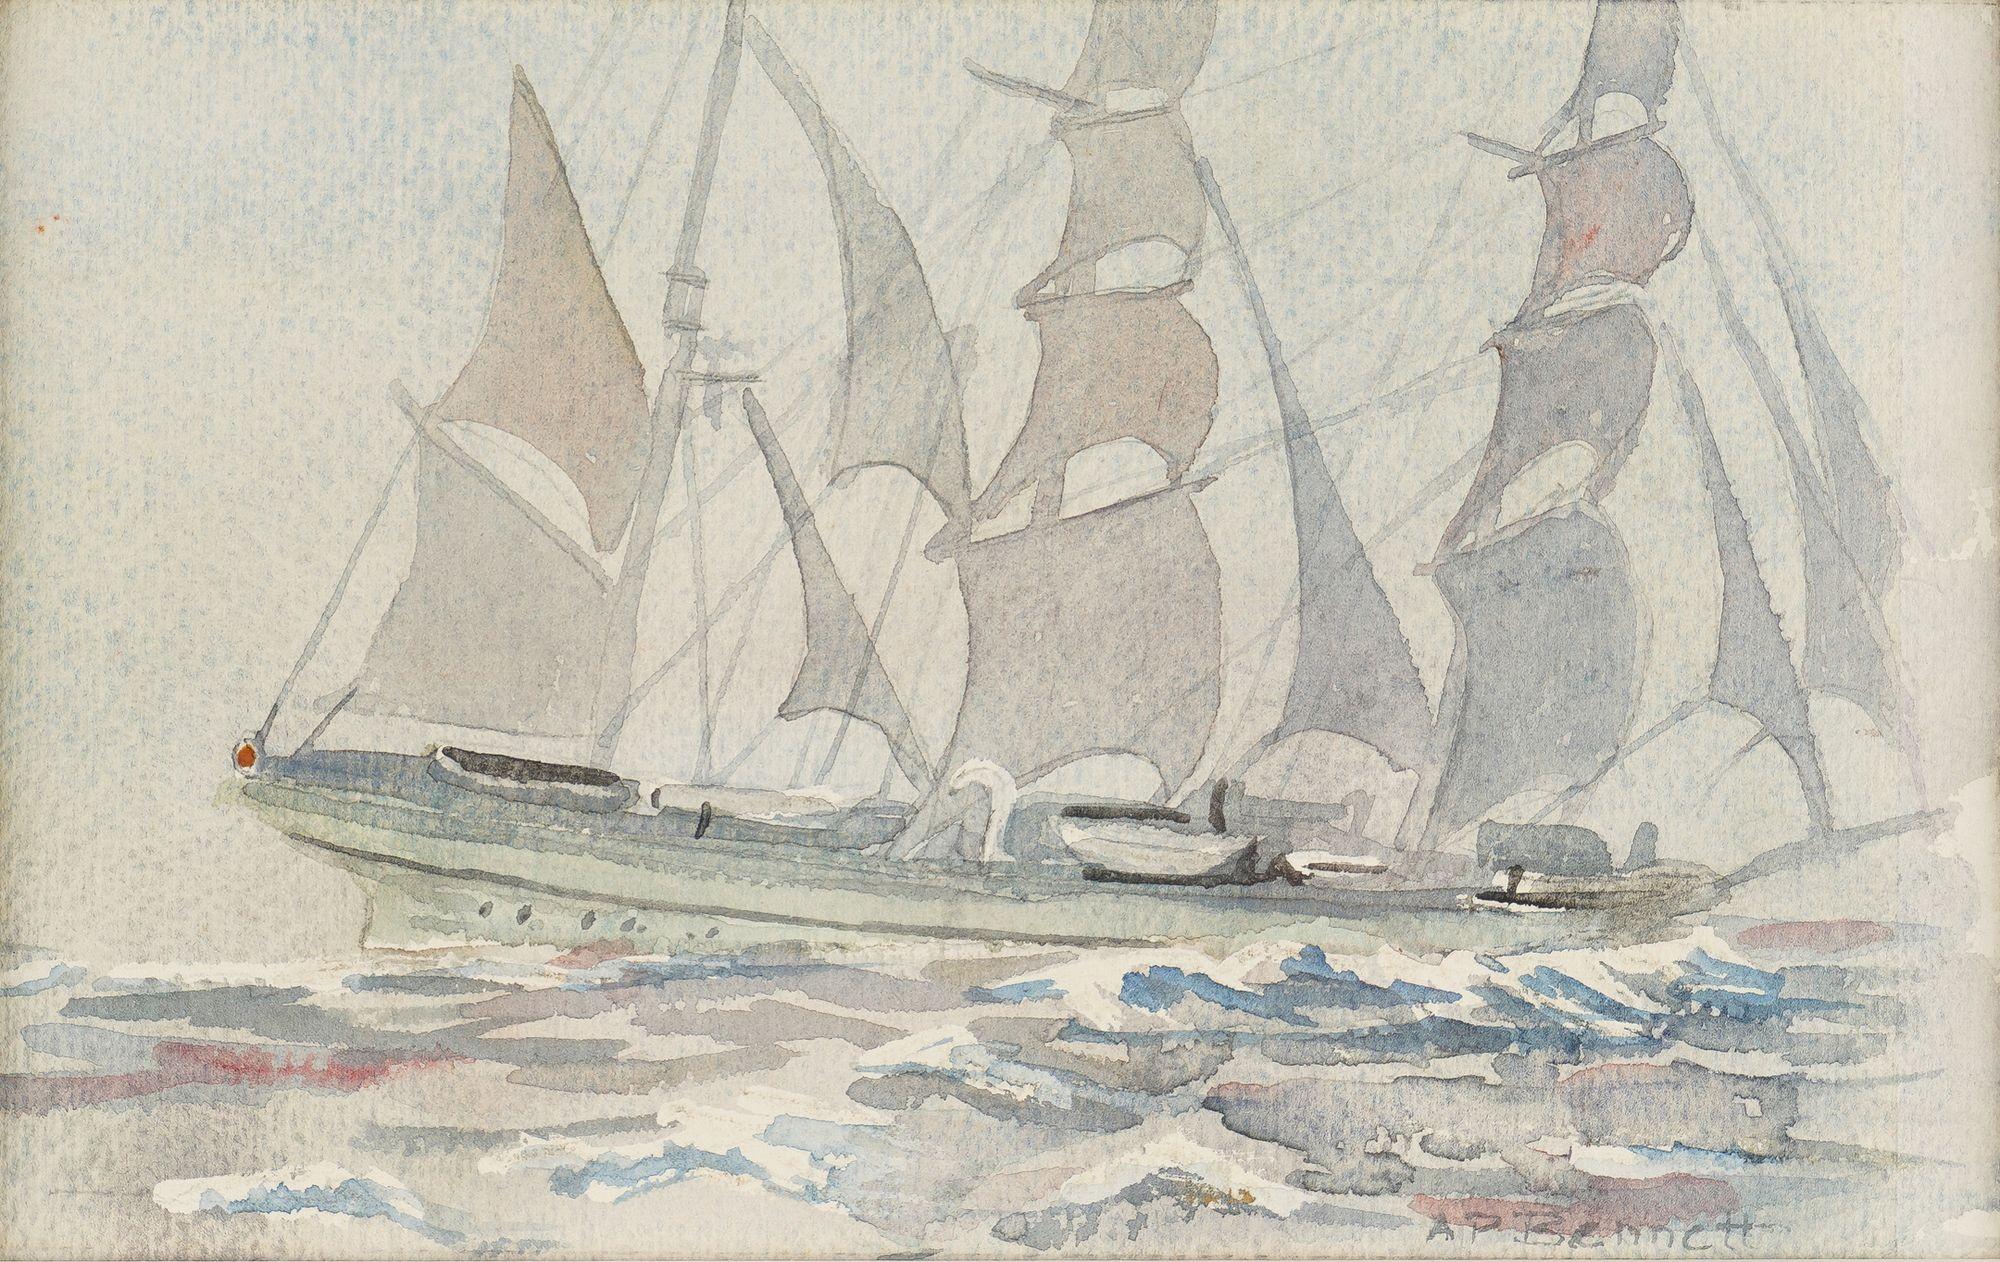 Watercolor study on paper of a three masted schooner at sea. The transparent celadon greens, grays, and blues convey a tonalist atmosphere to the composition. Archival mount under UV plexiglass and fitted in a carved limed wood frame.

Signed, lower